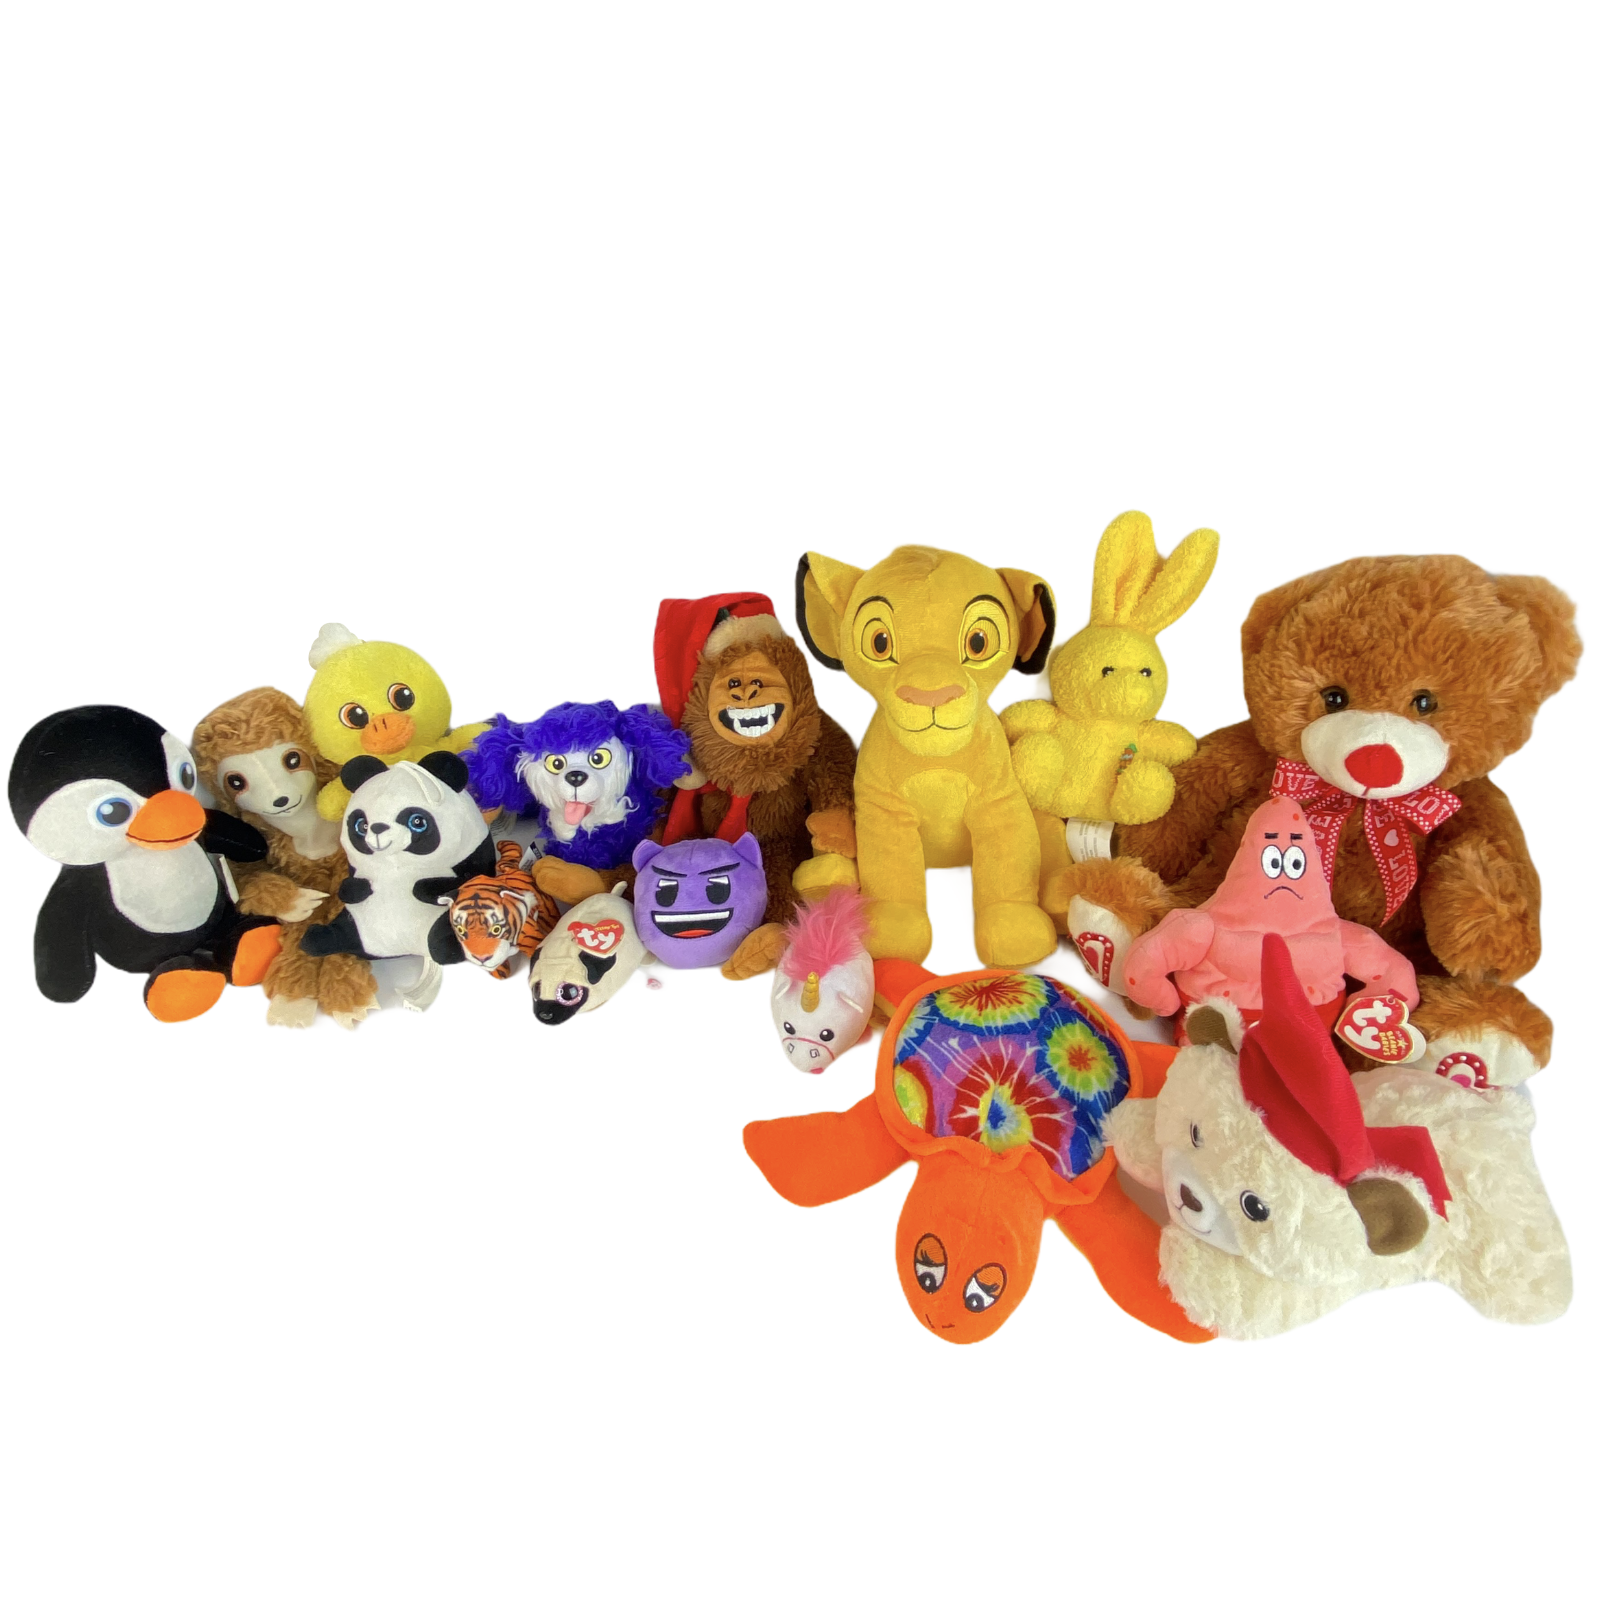 Disney TY and Others Large Lot of 16 Stuffed Animal Small Sized Plush Toys Cute